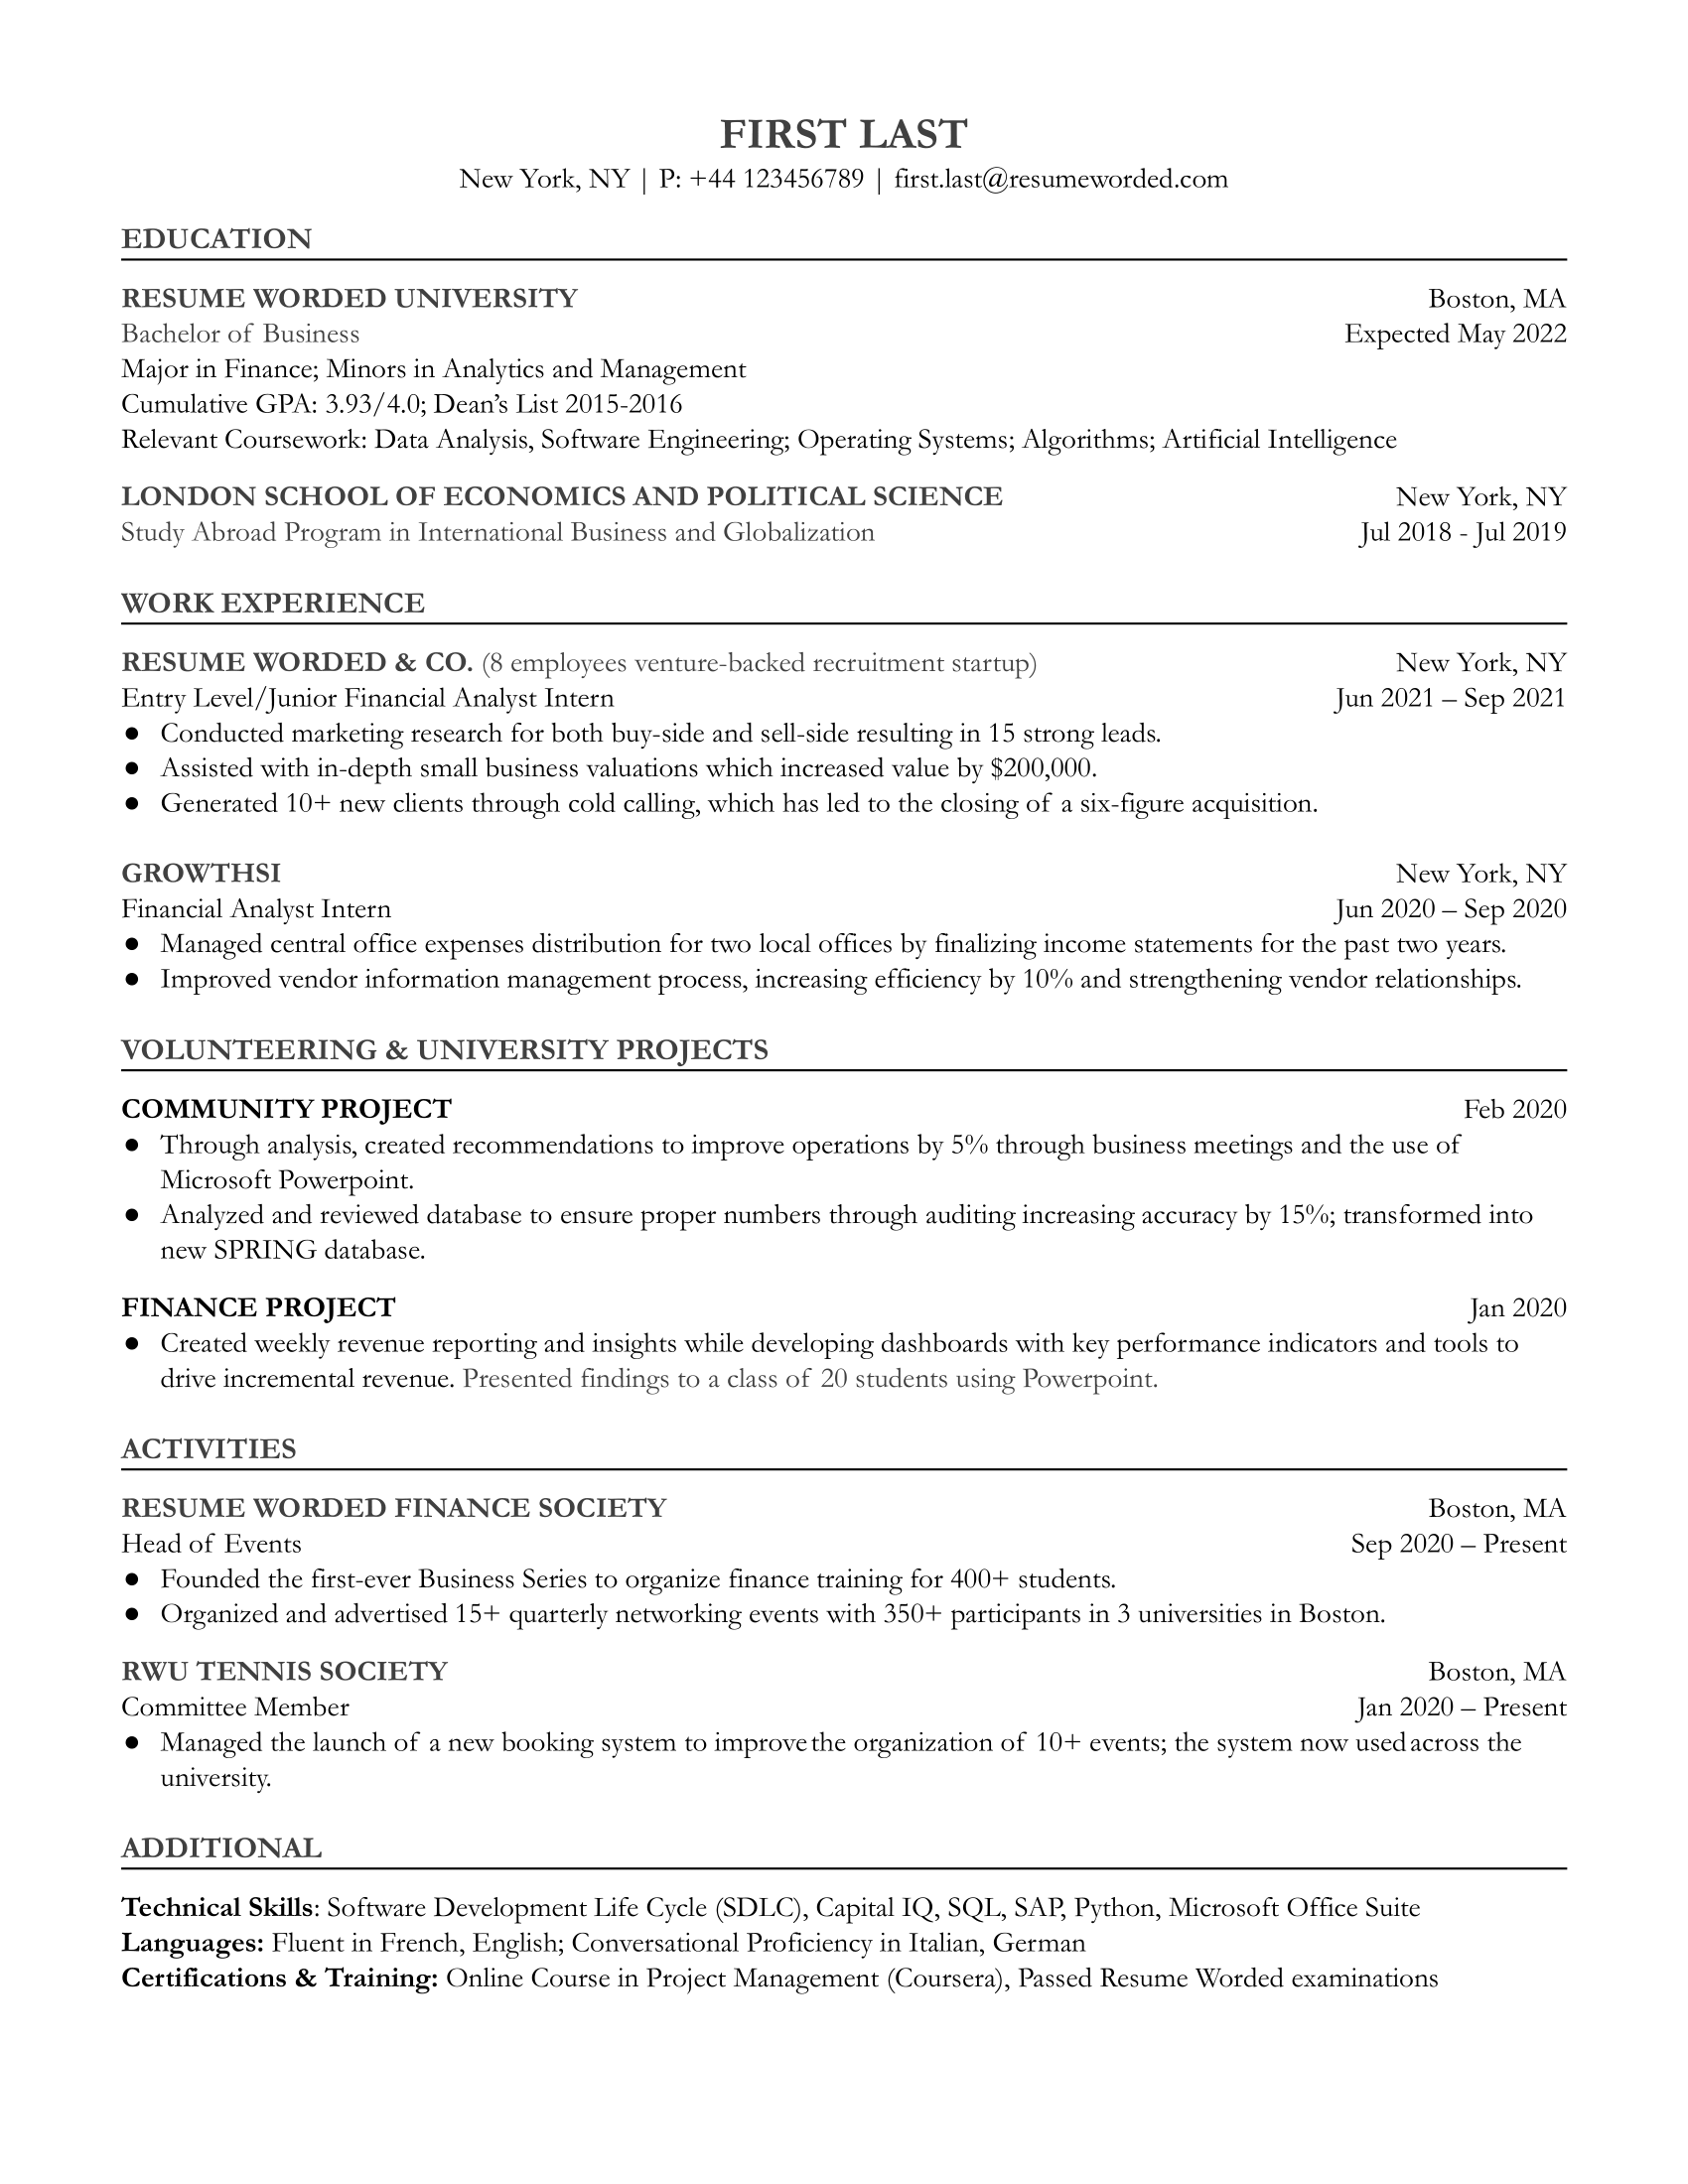 Entry Level/Junior Financial Analyst Resume Template + Example